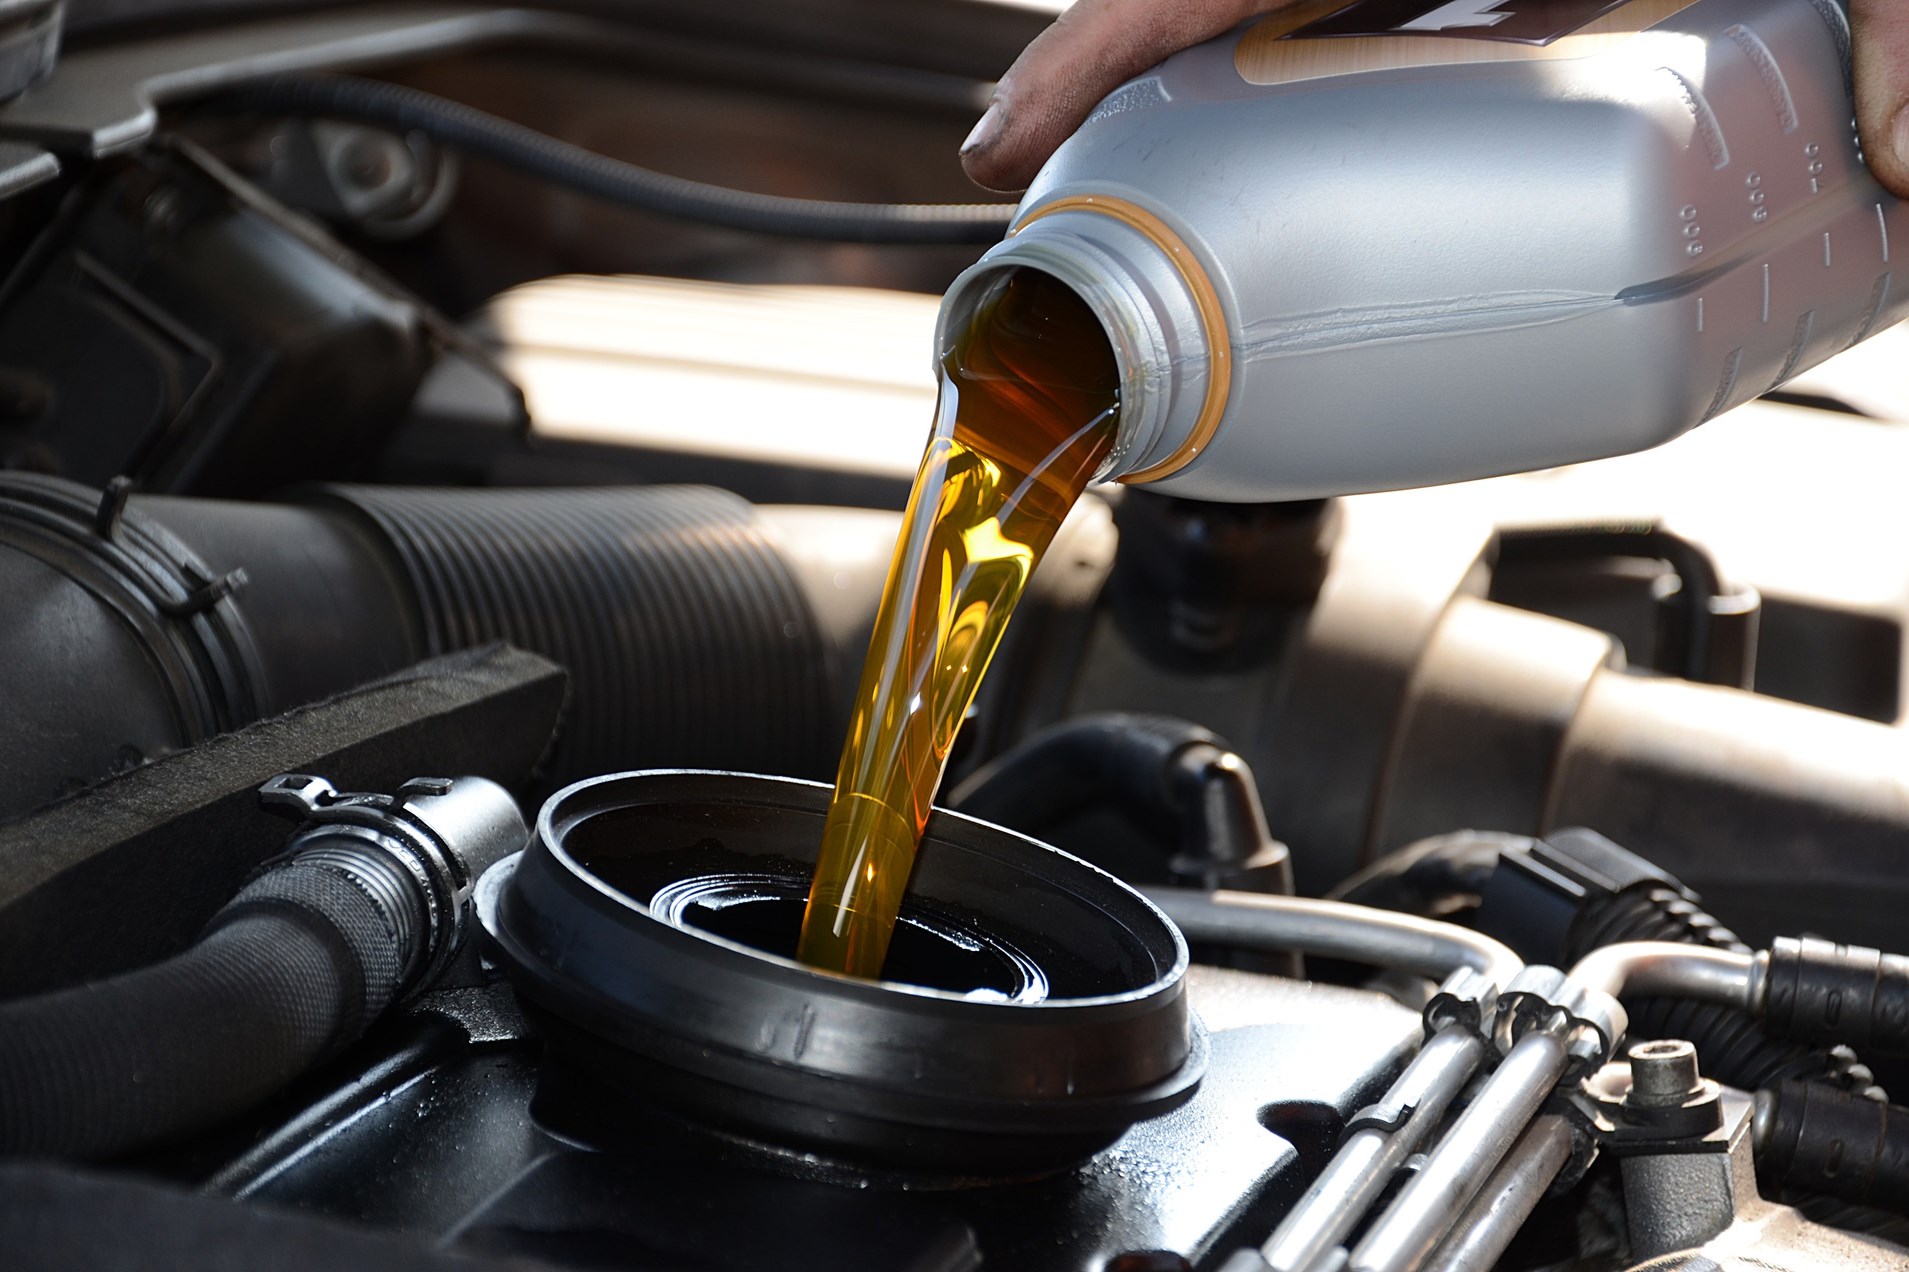 Engine Health First: Professional Oil Change Services